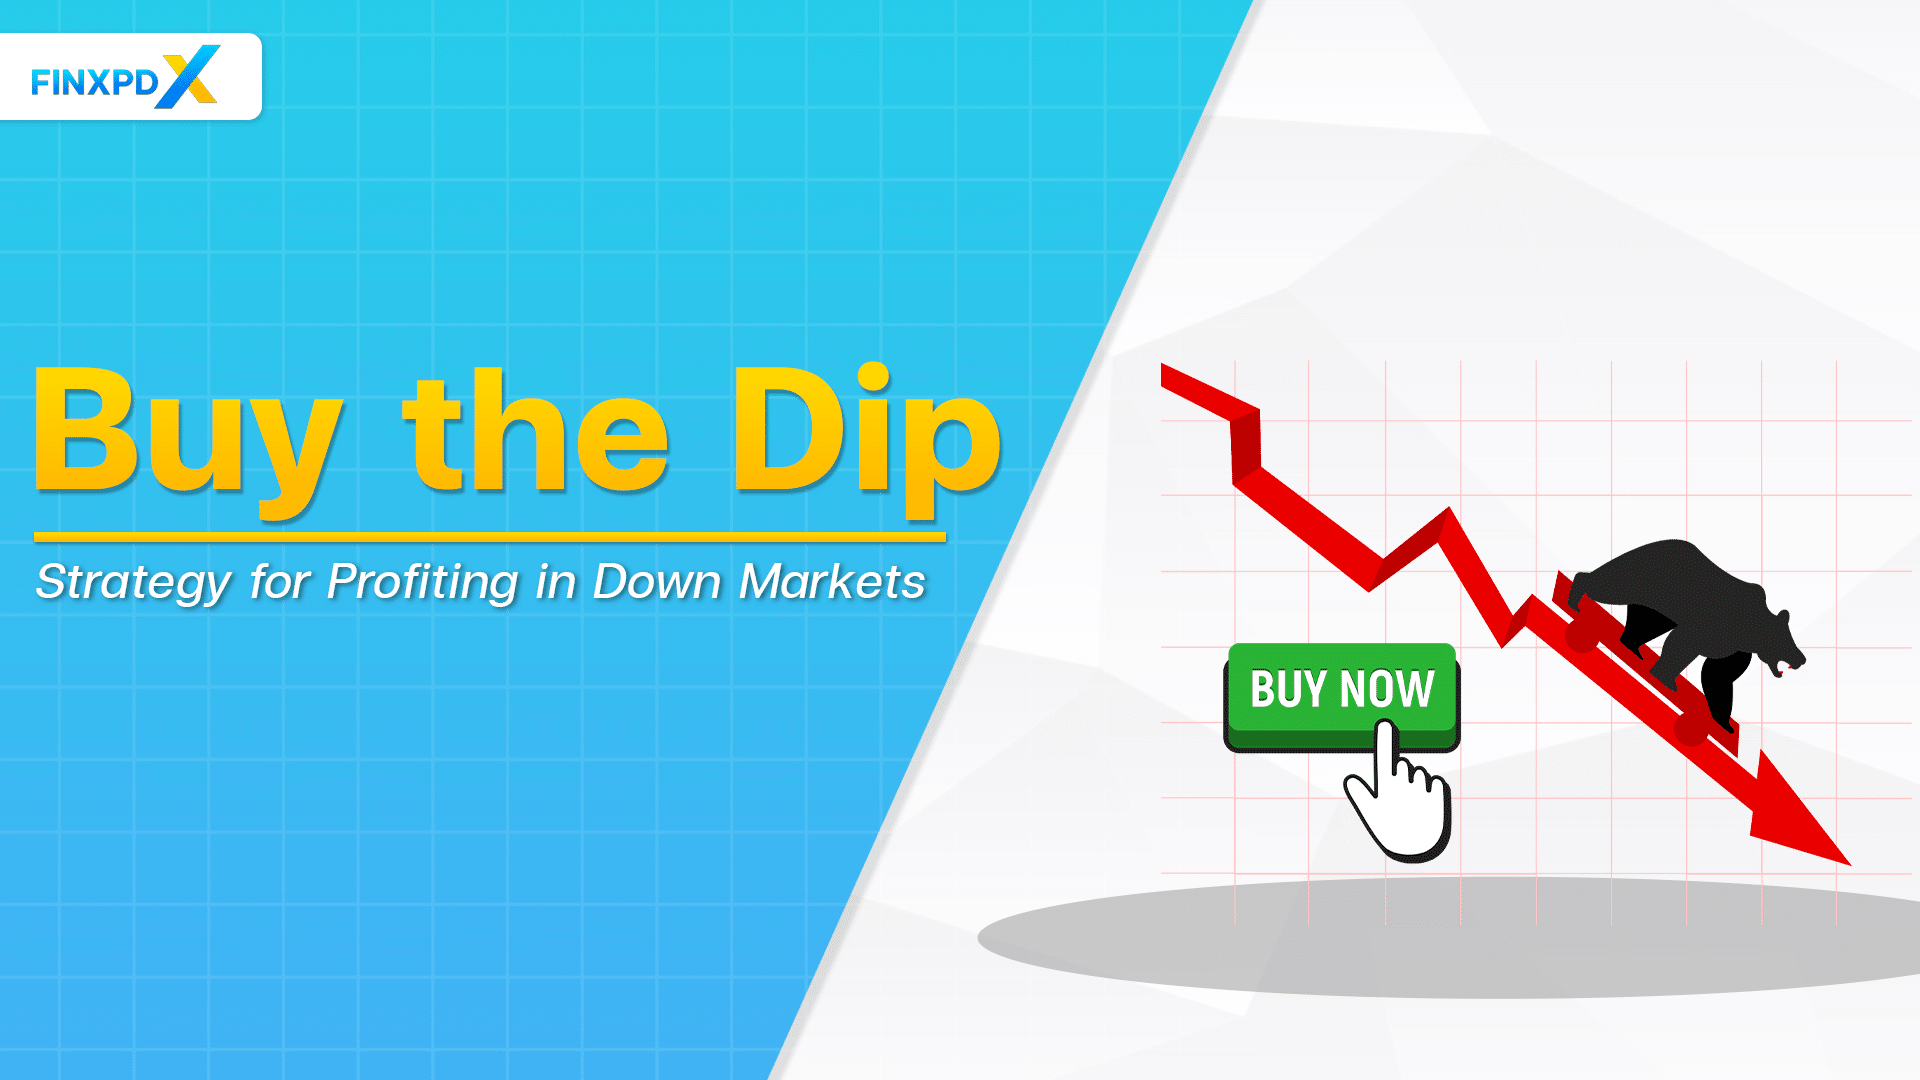 Buy the Dip: Strategy for Profiting in Down Markets